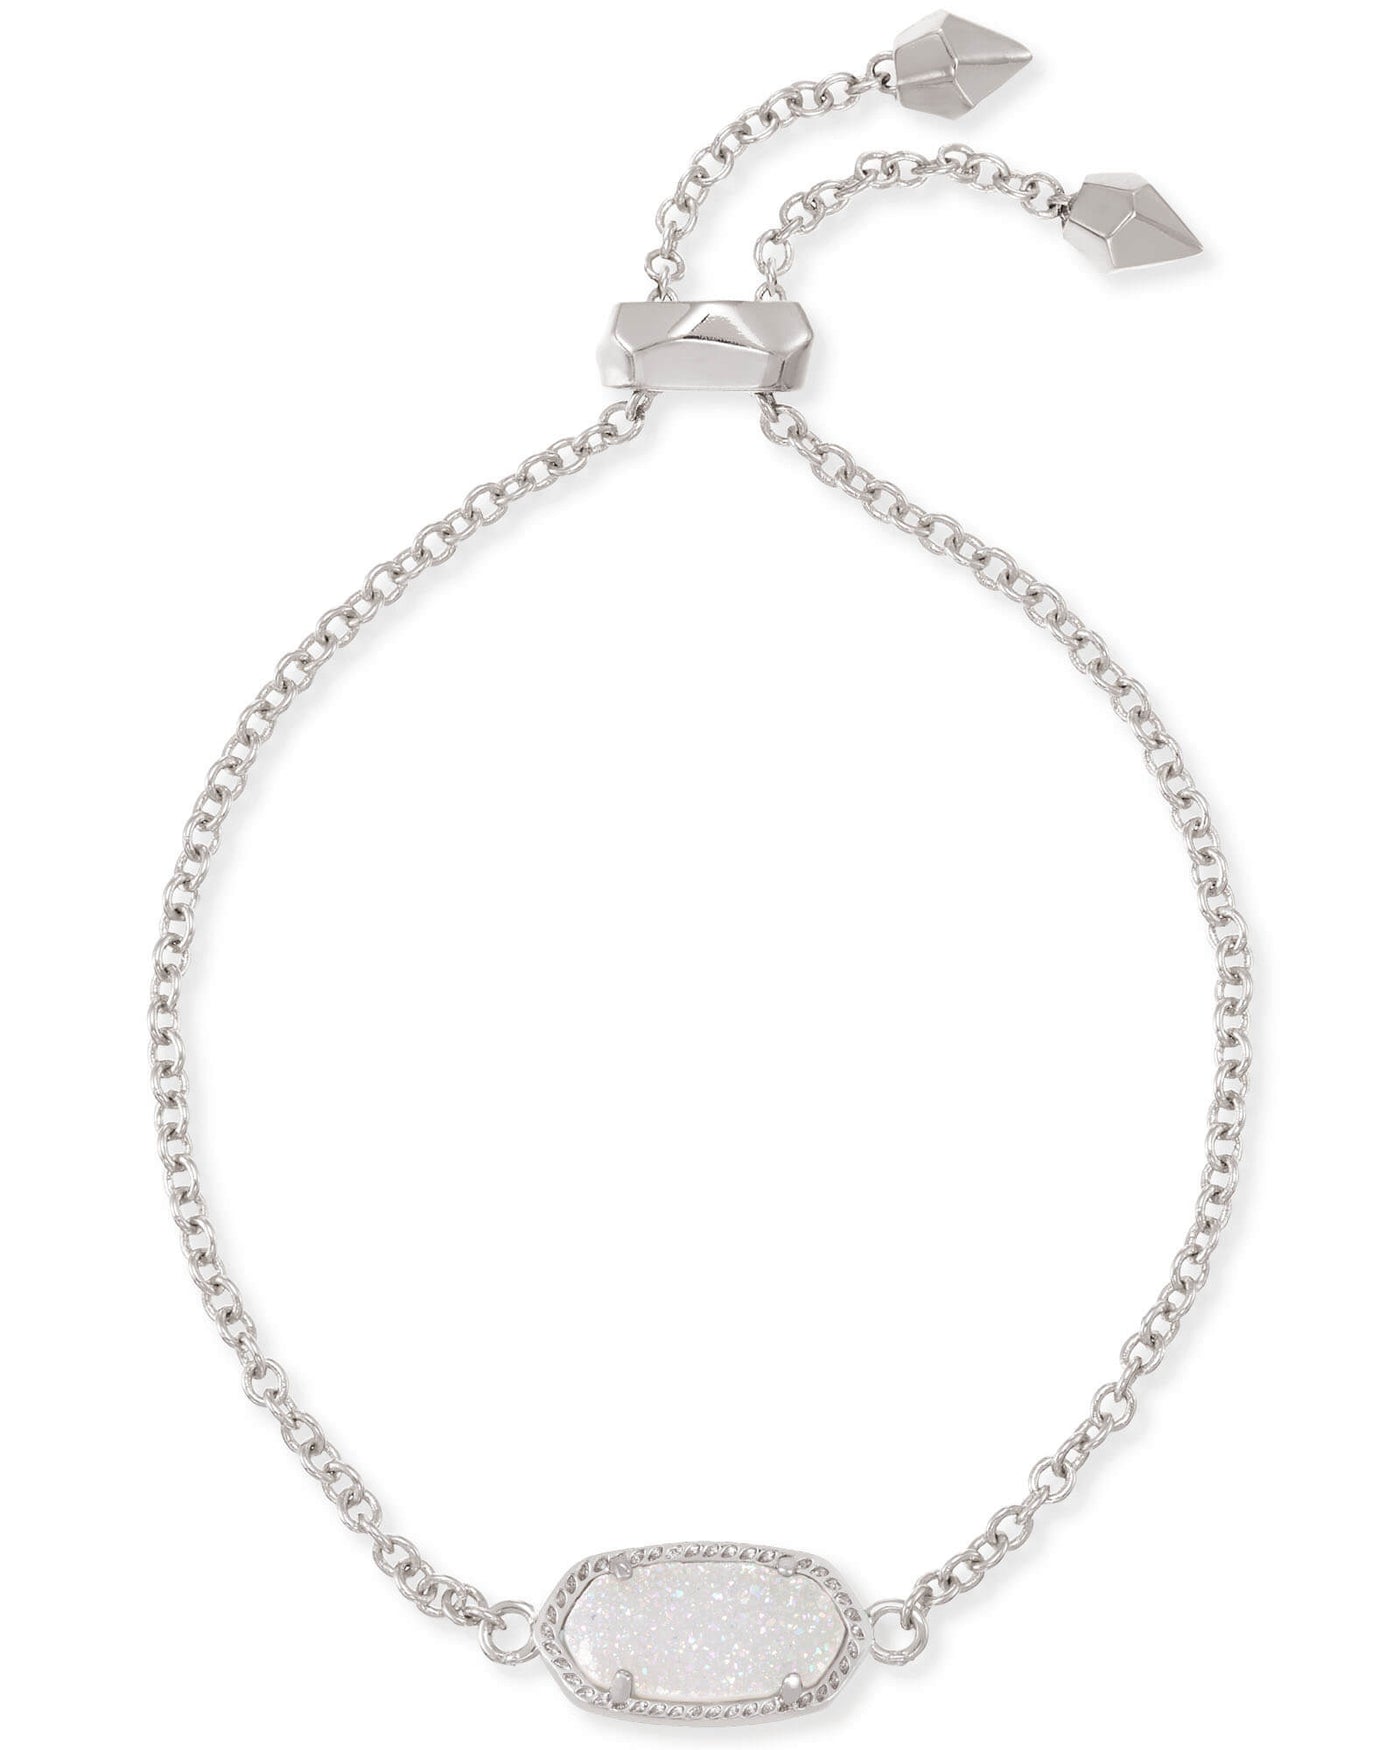 Kendra Scott Elaina Silver Adjustable Chain Bracelet-Bracelets-Kendra Scott-Market Street Nest, Fashionable Clothing, Shoes and Home Décor Located in Mabank, TX